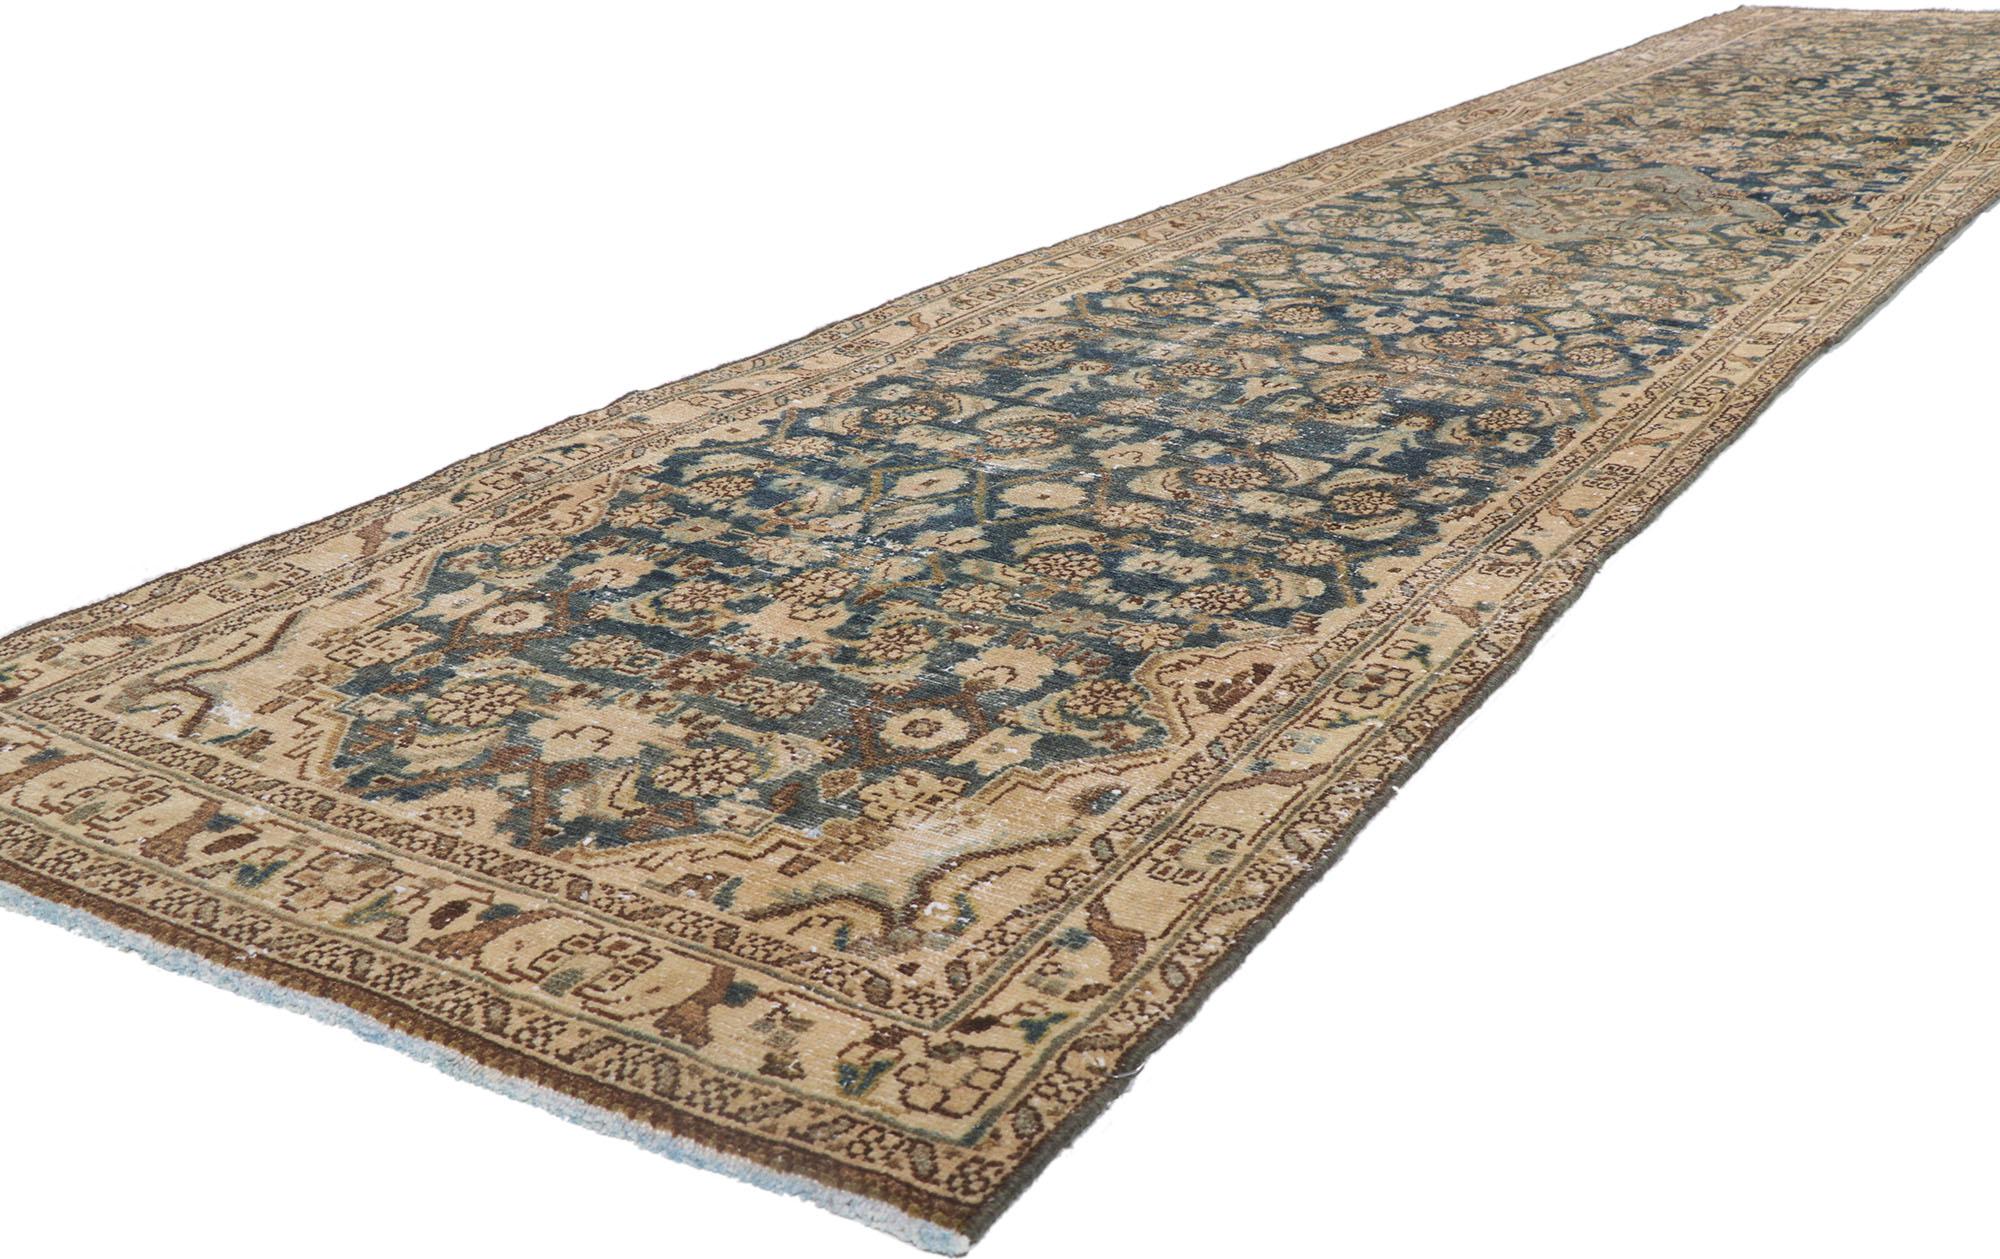 61014 Distressed antique Persian Malayer Runner, 03'03 x 16'04. Emanating sophistication and nomadic charm with rustic sensibility, this hand knotted wool distressed antique Persian Malayer carpet runner beautifully embodies a modern style. The